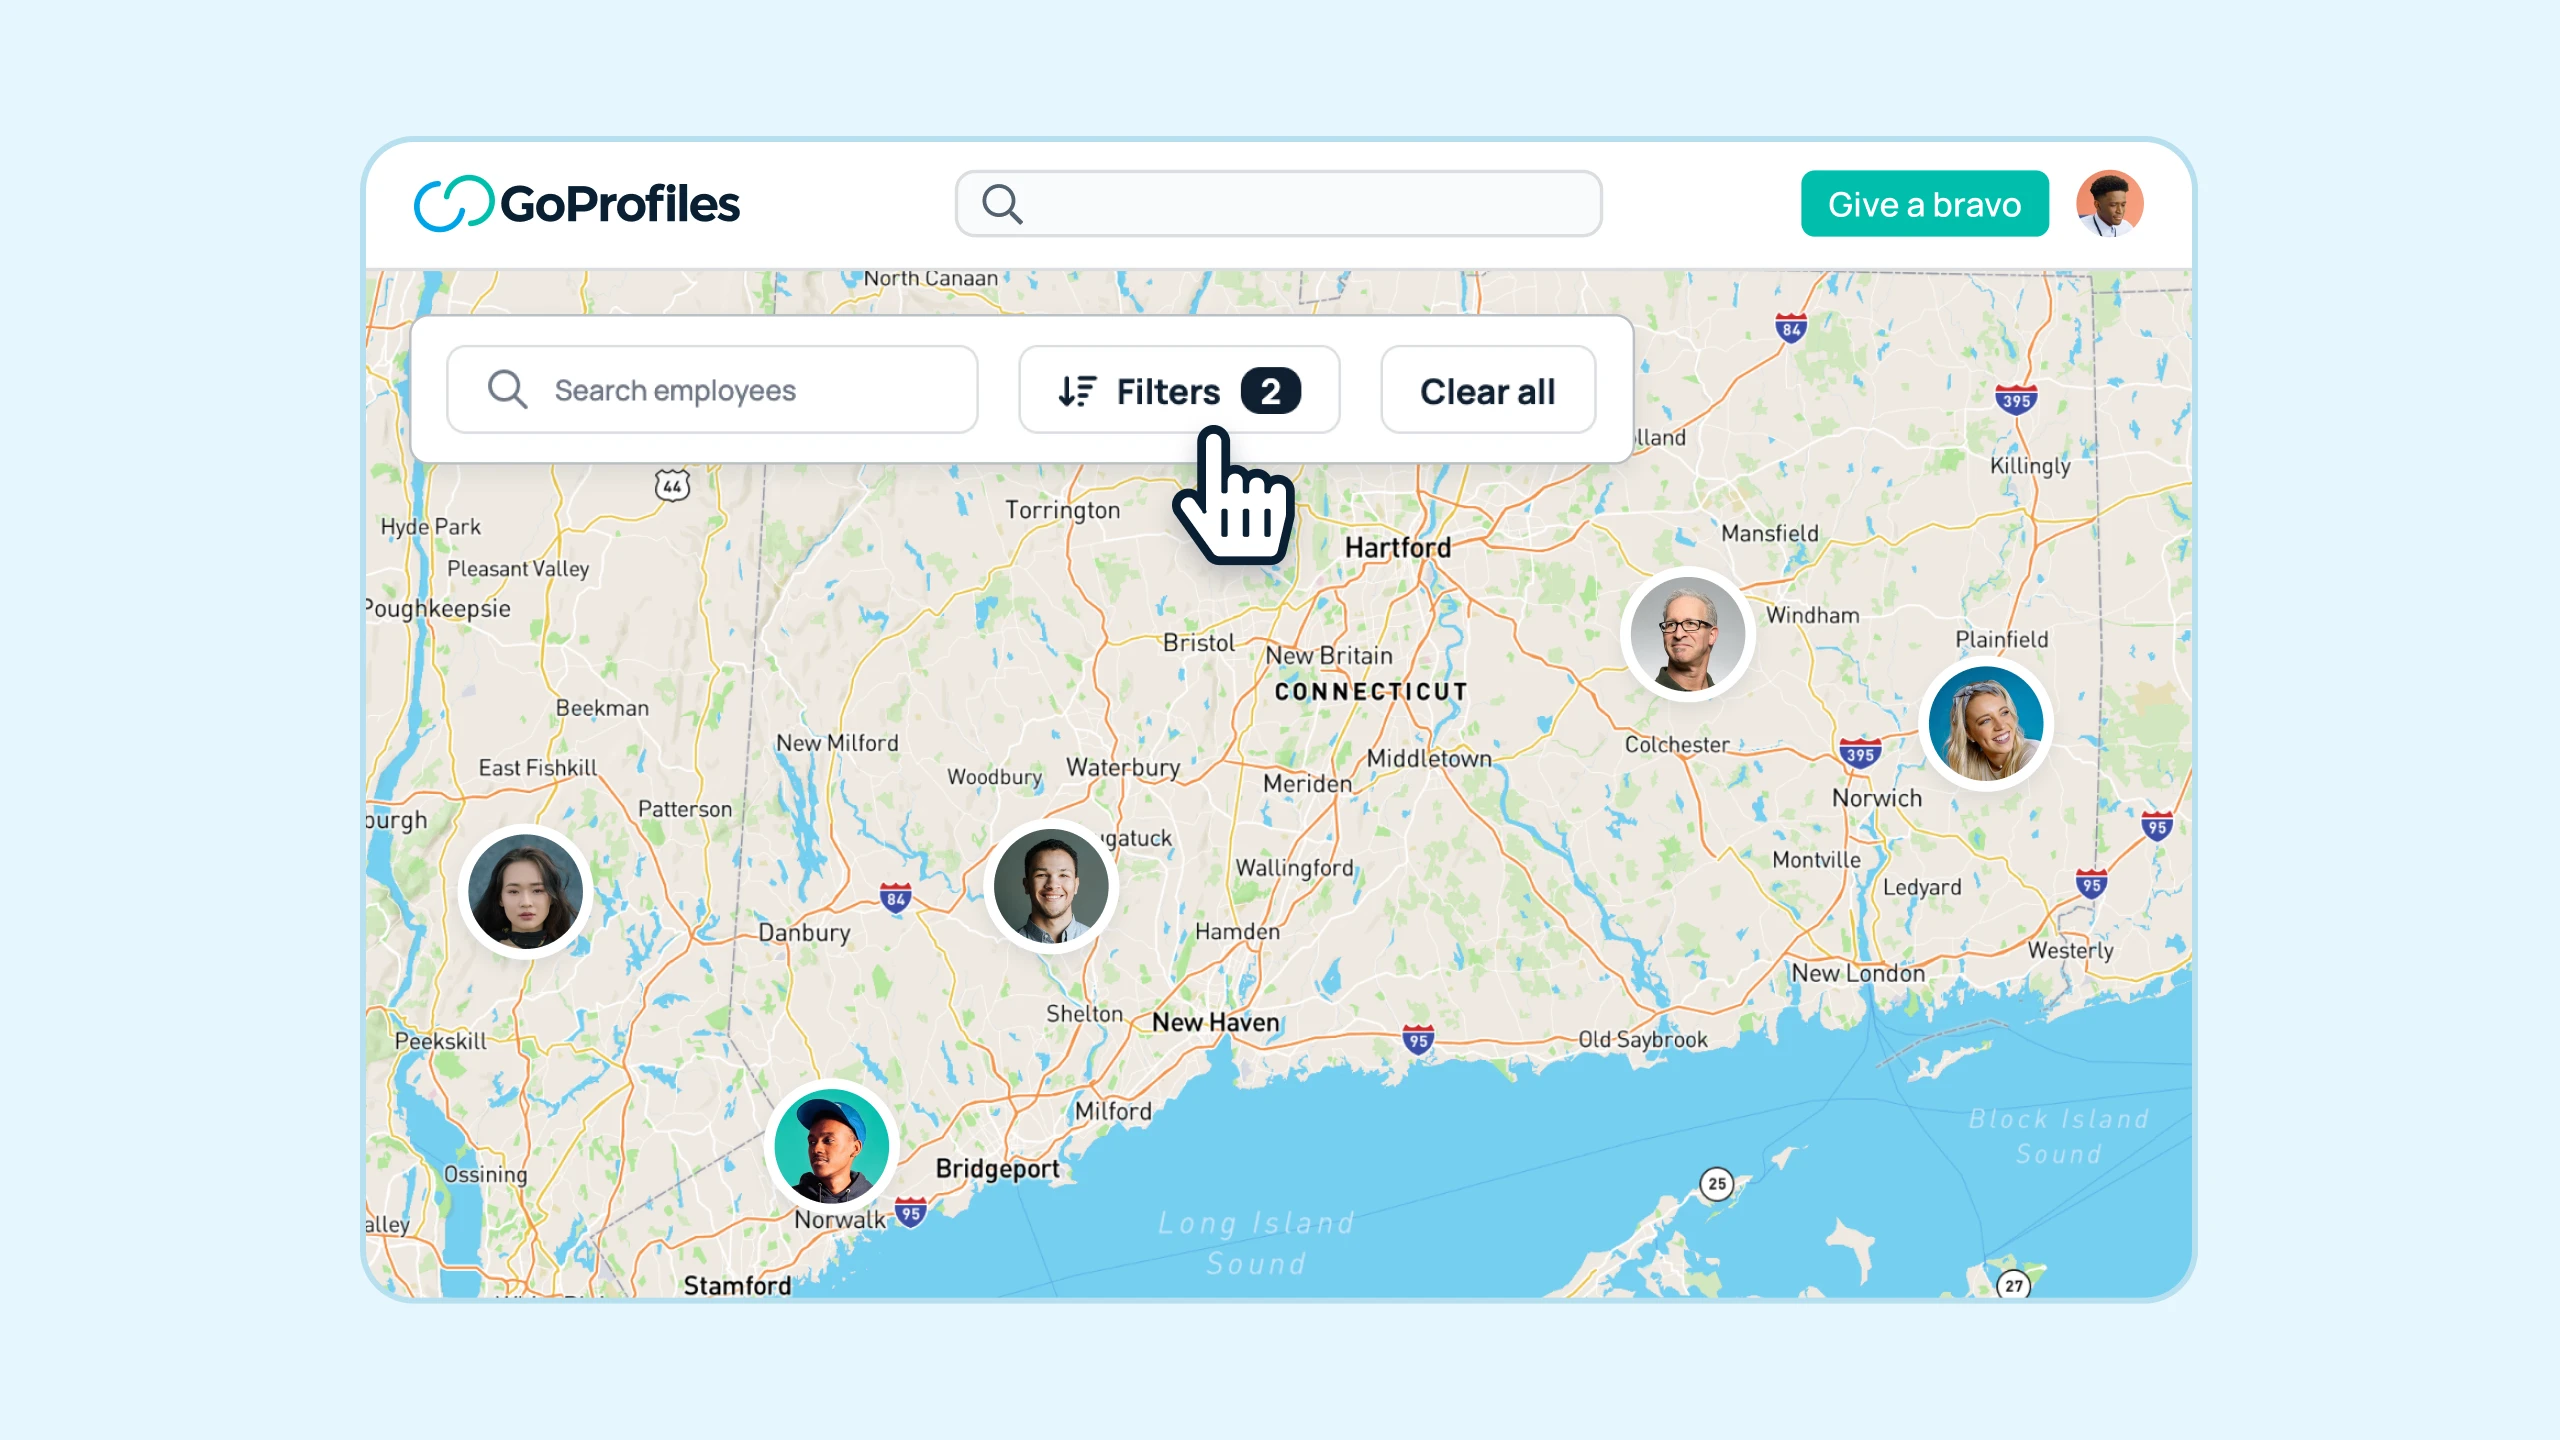 GoProfiles Employee Map: How to Use Filters to Find Coworkers